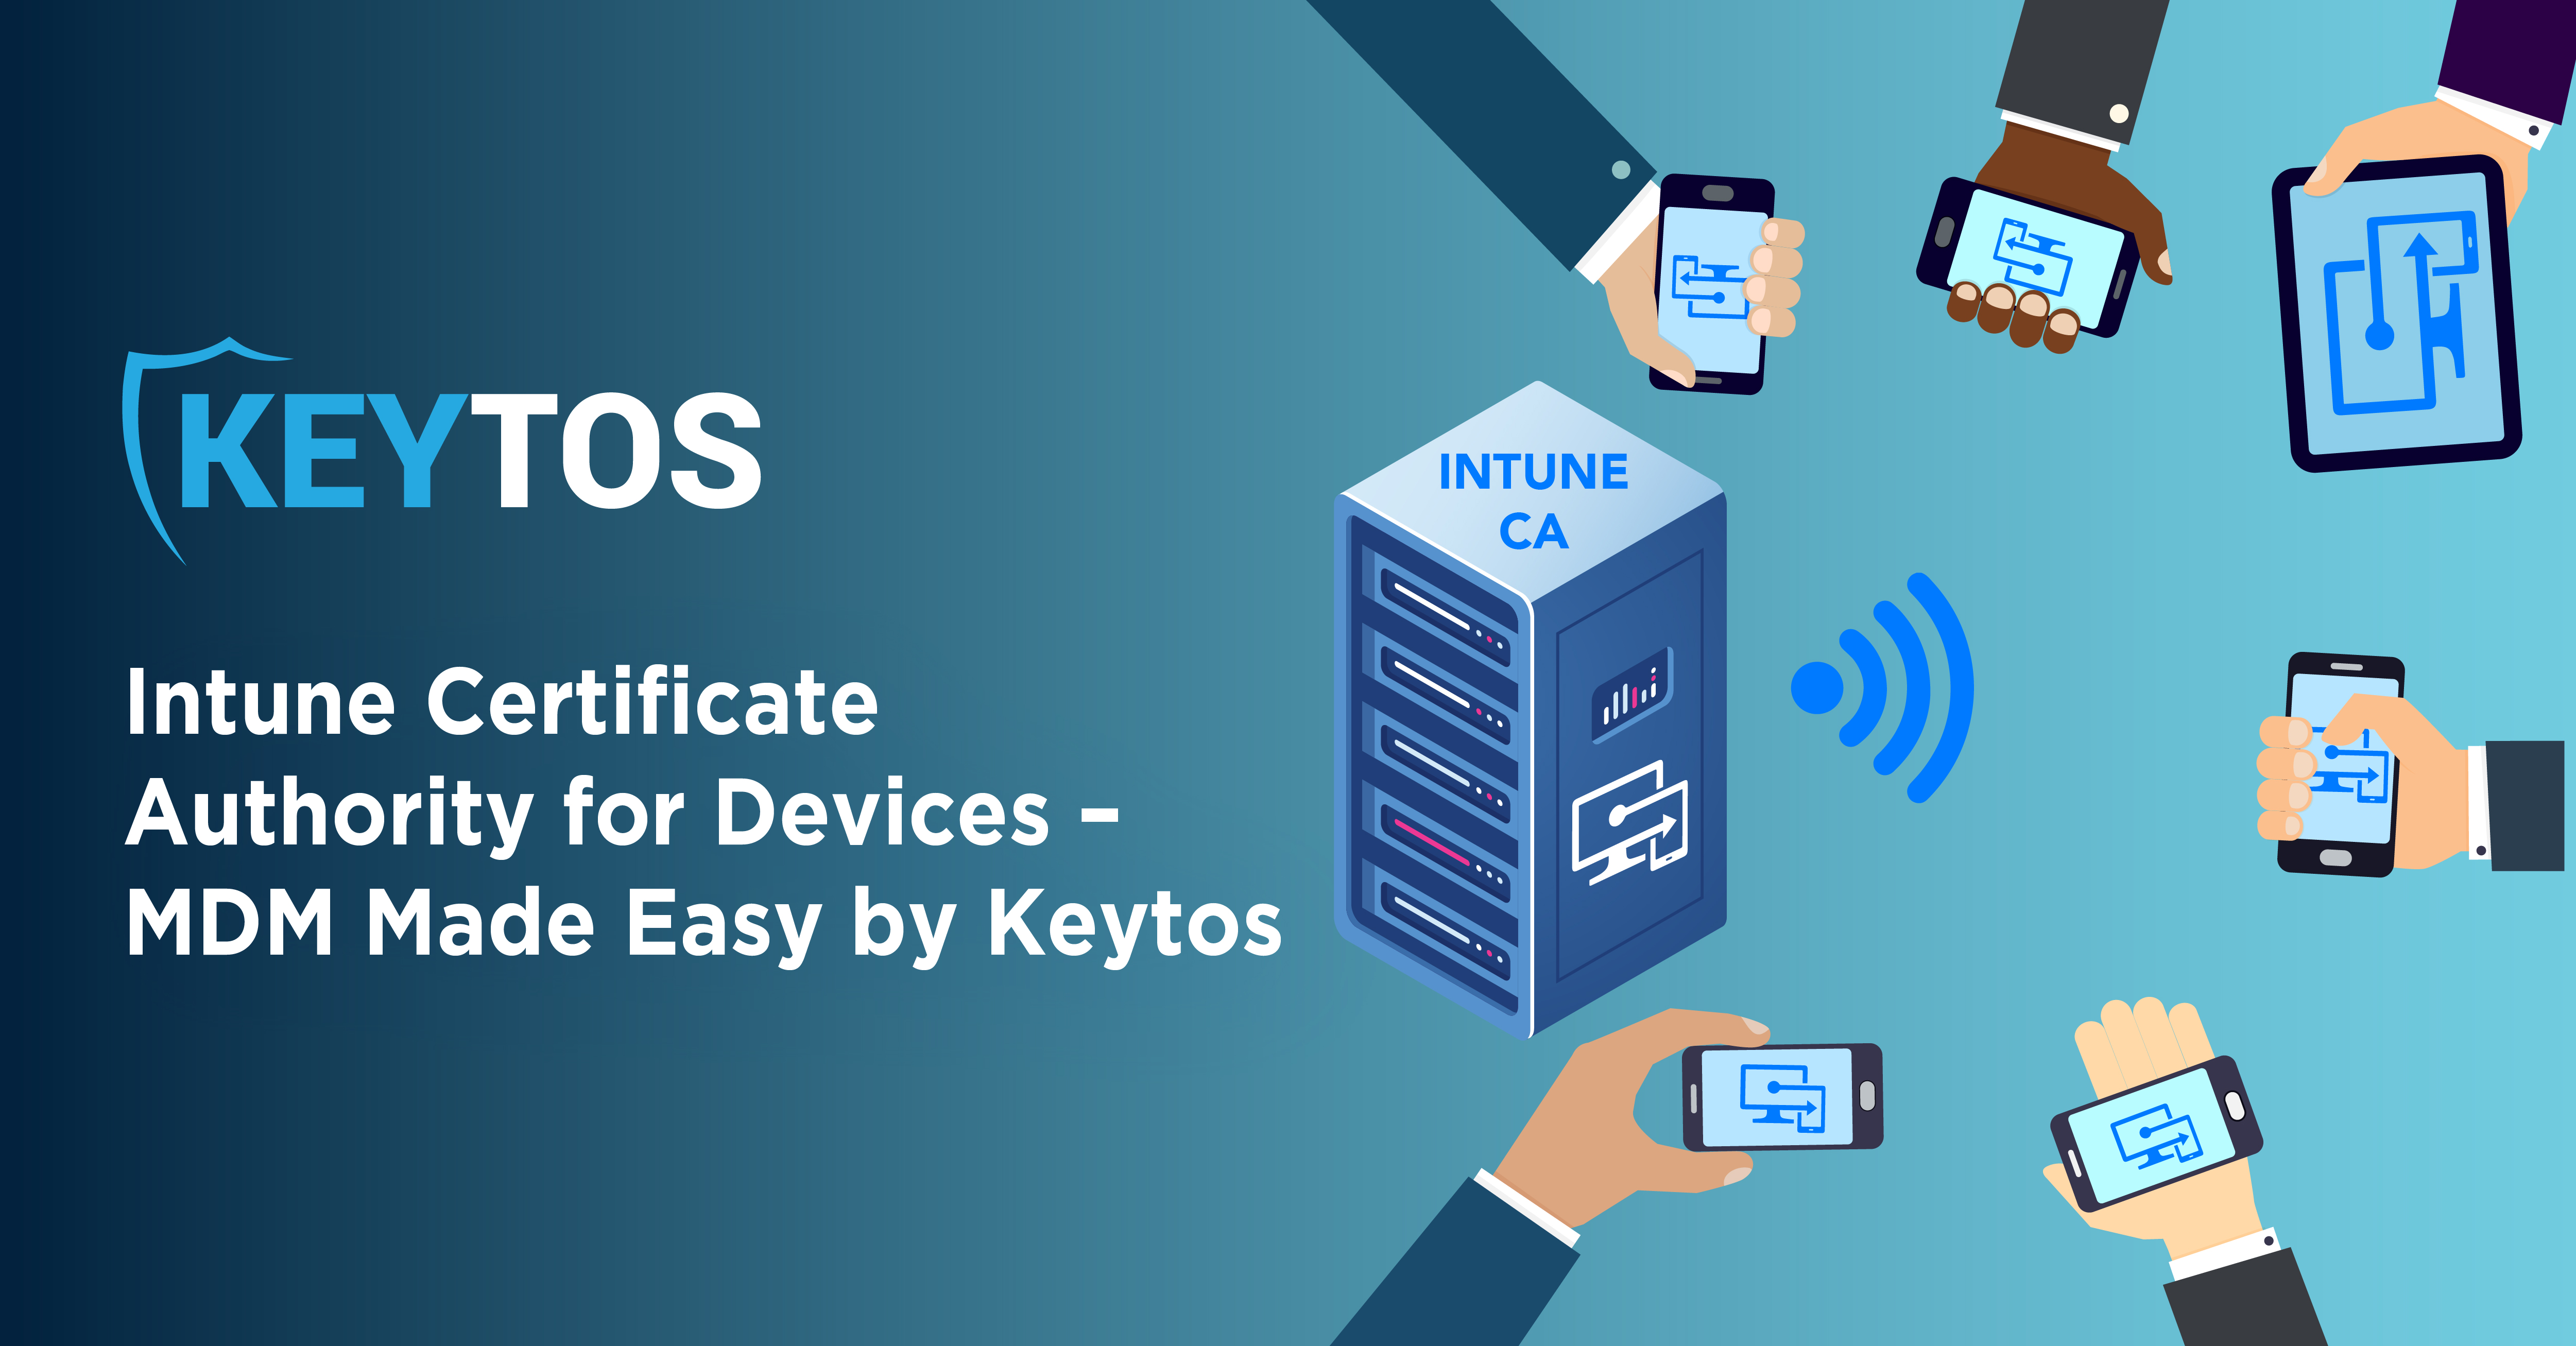 Intune Certificate Authority for Devices – MDM Made Easy by Keytos